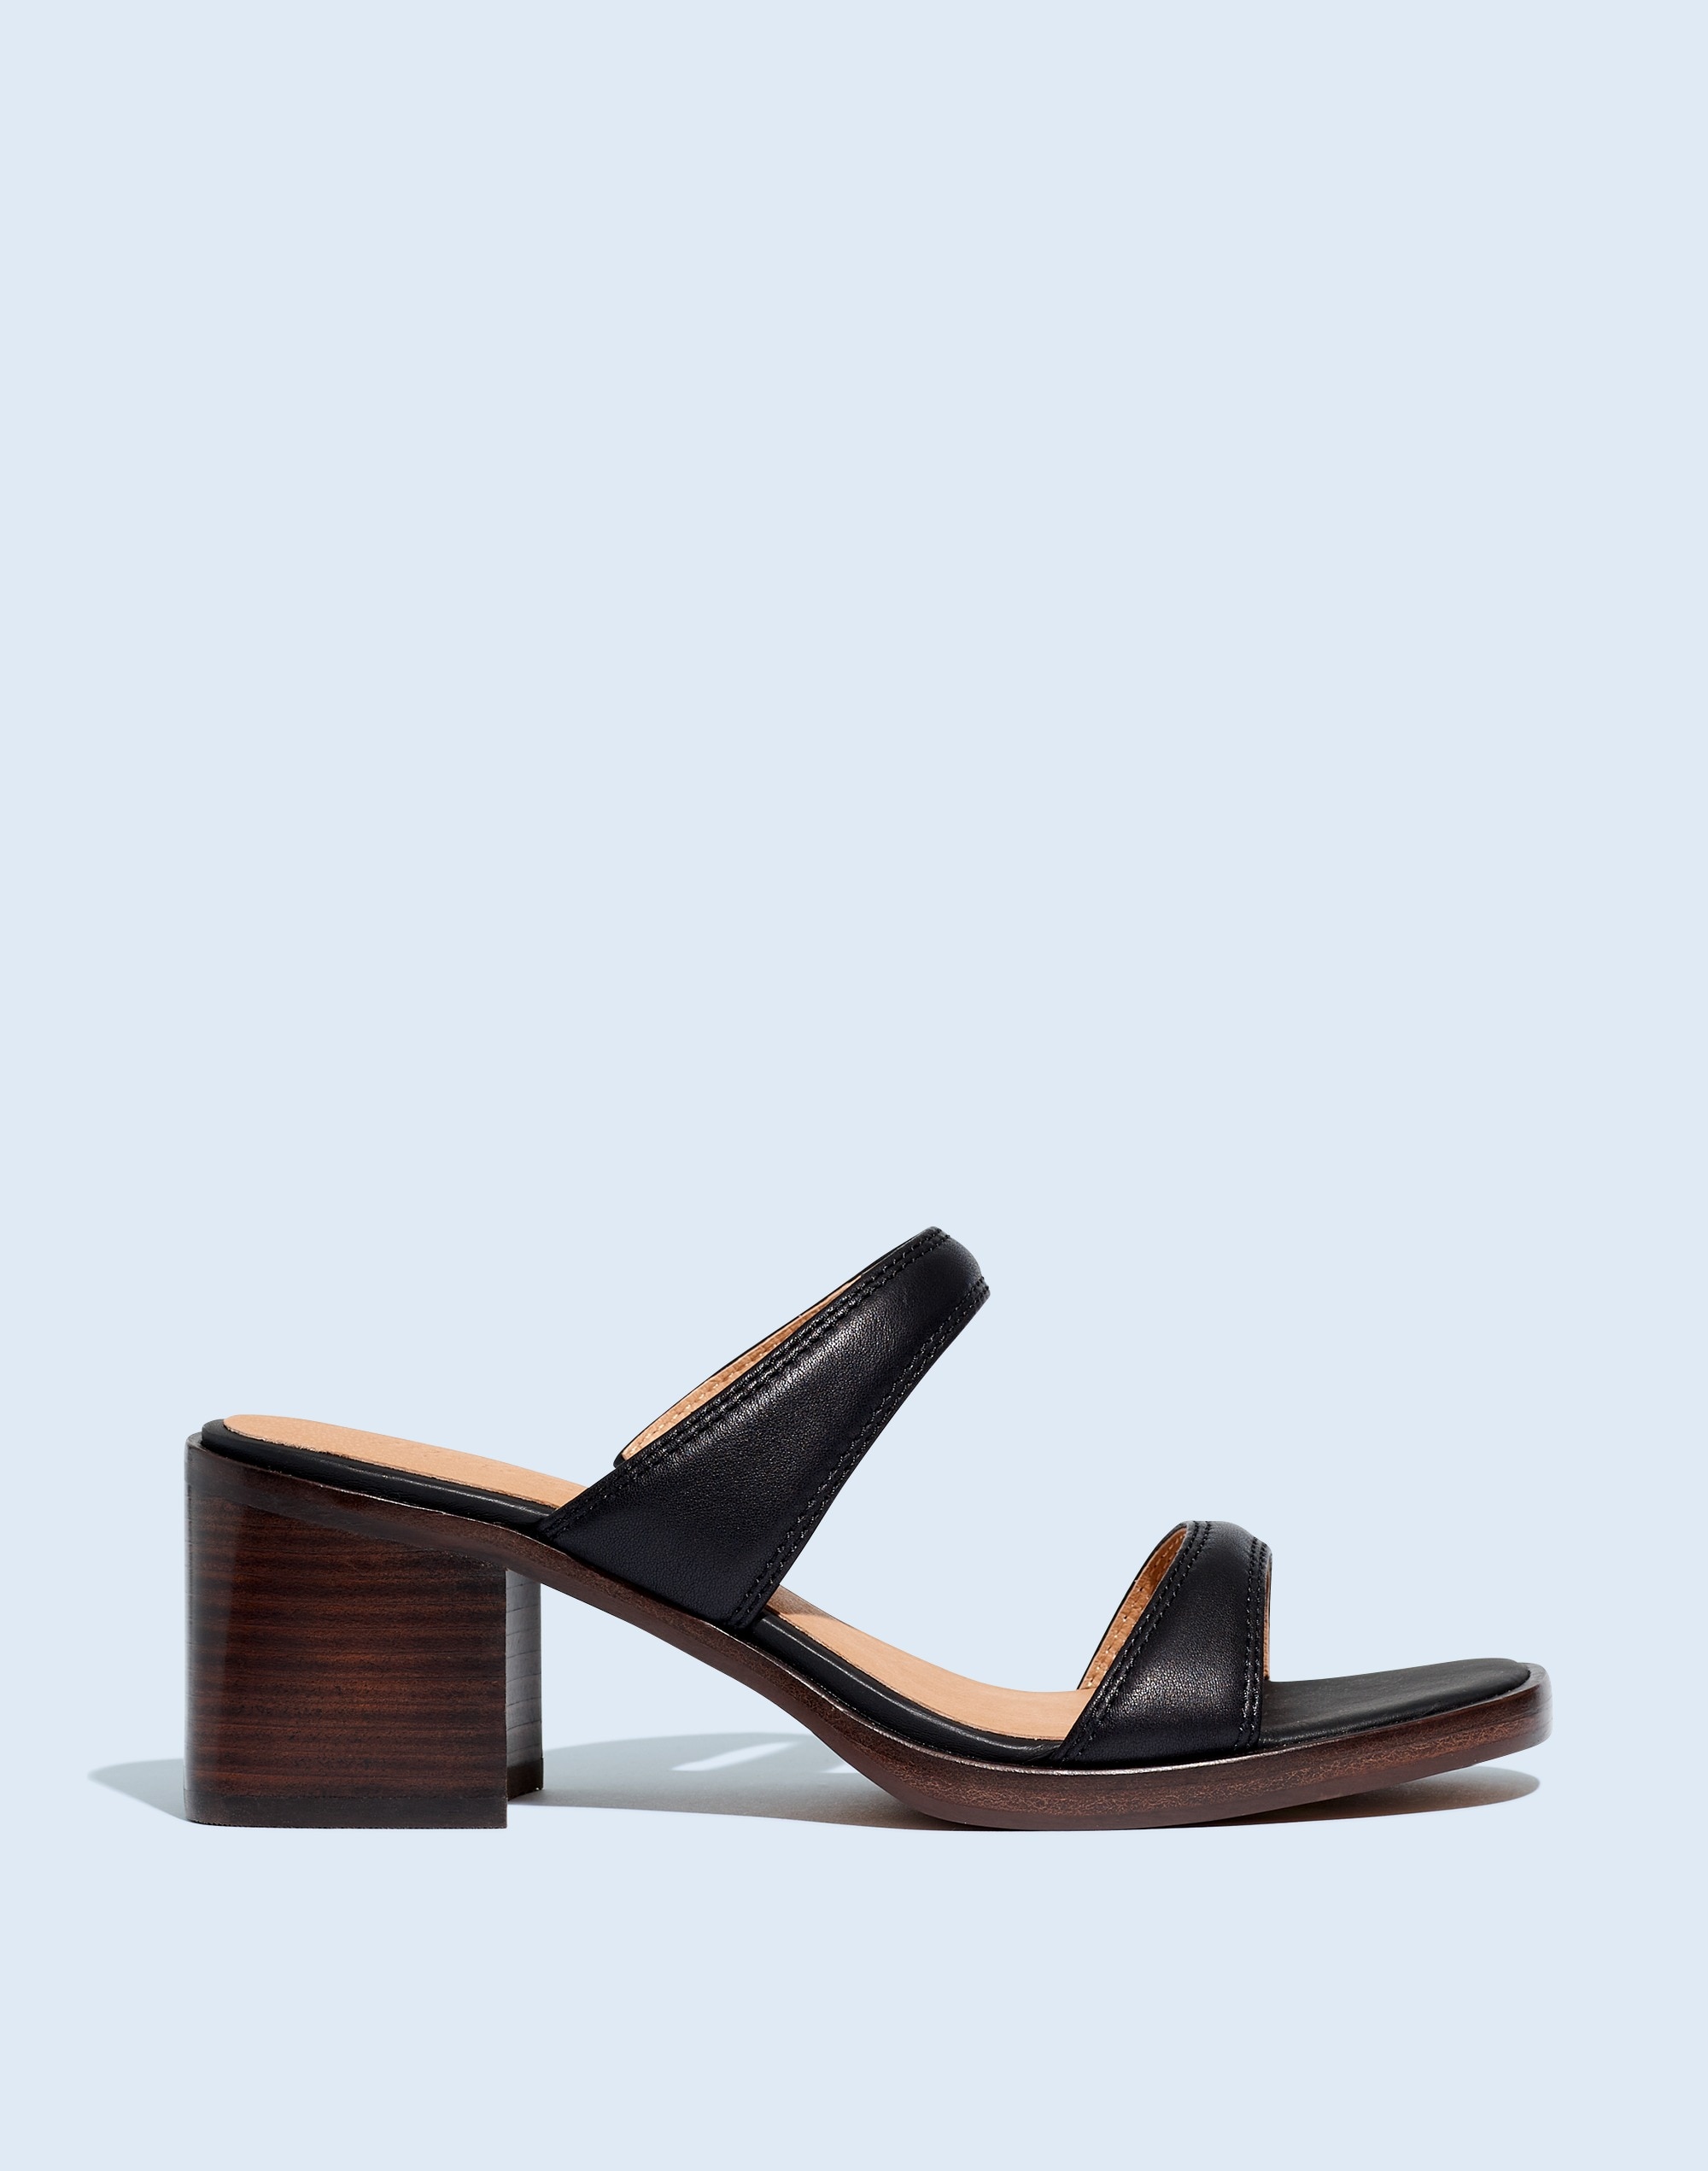 The Saige Double-Strap Sandal in Leather